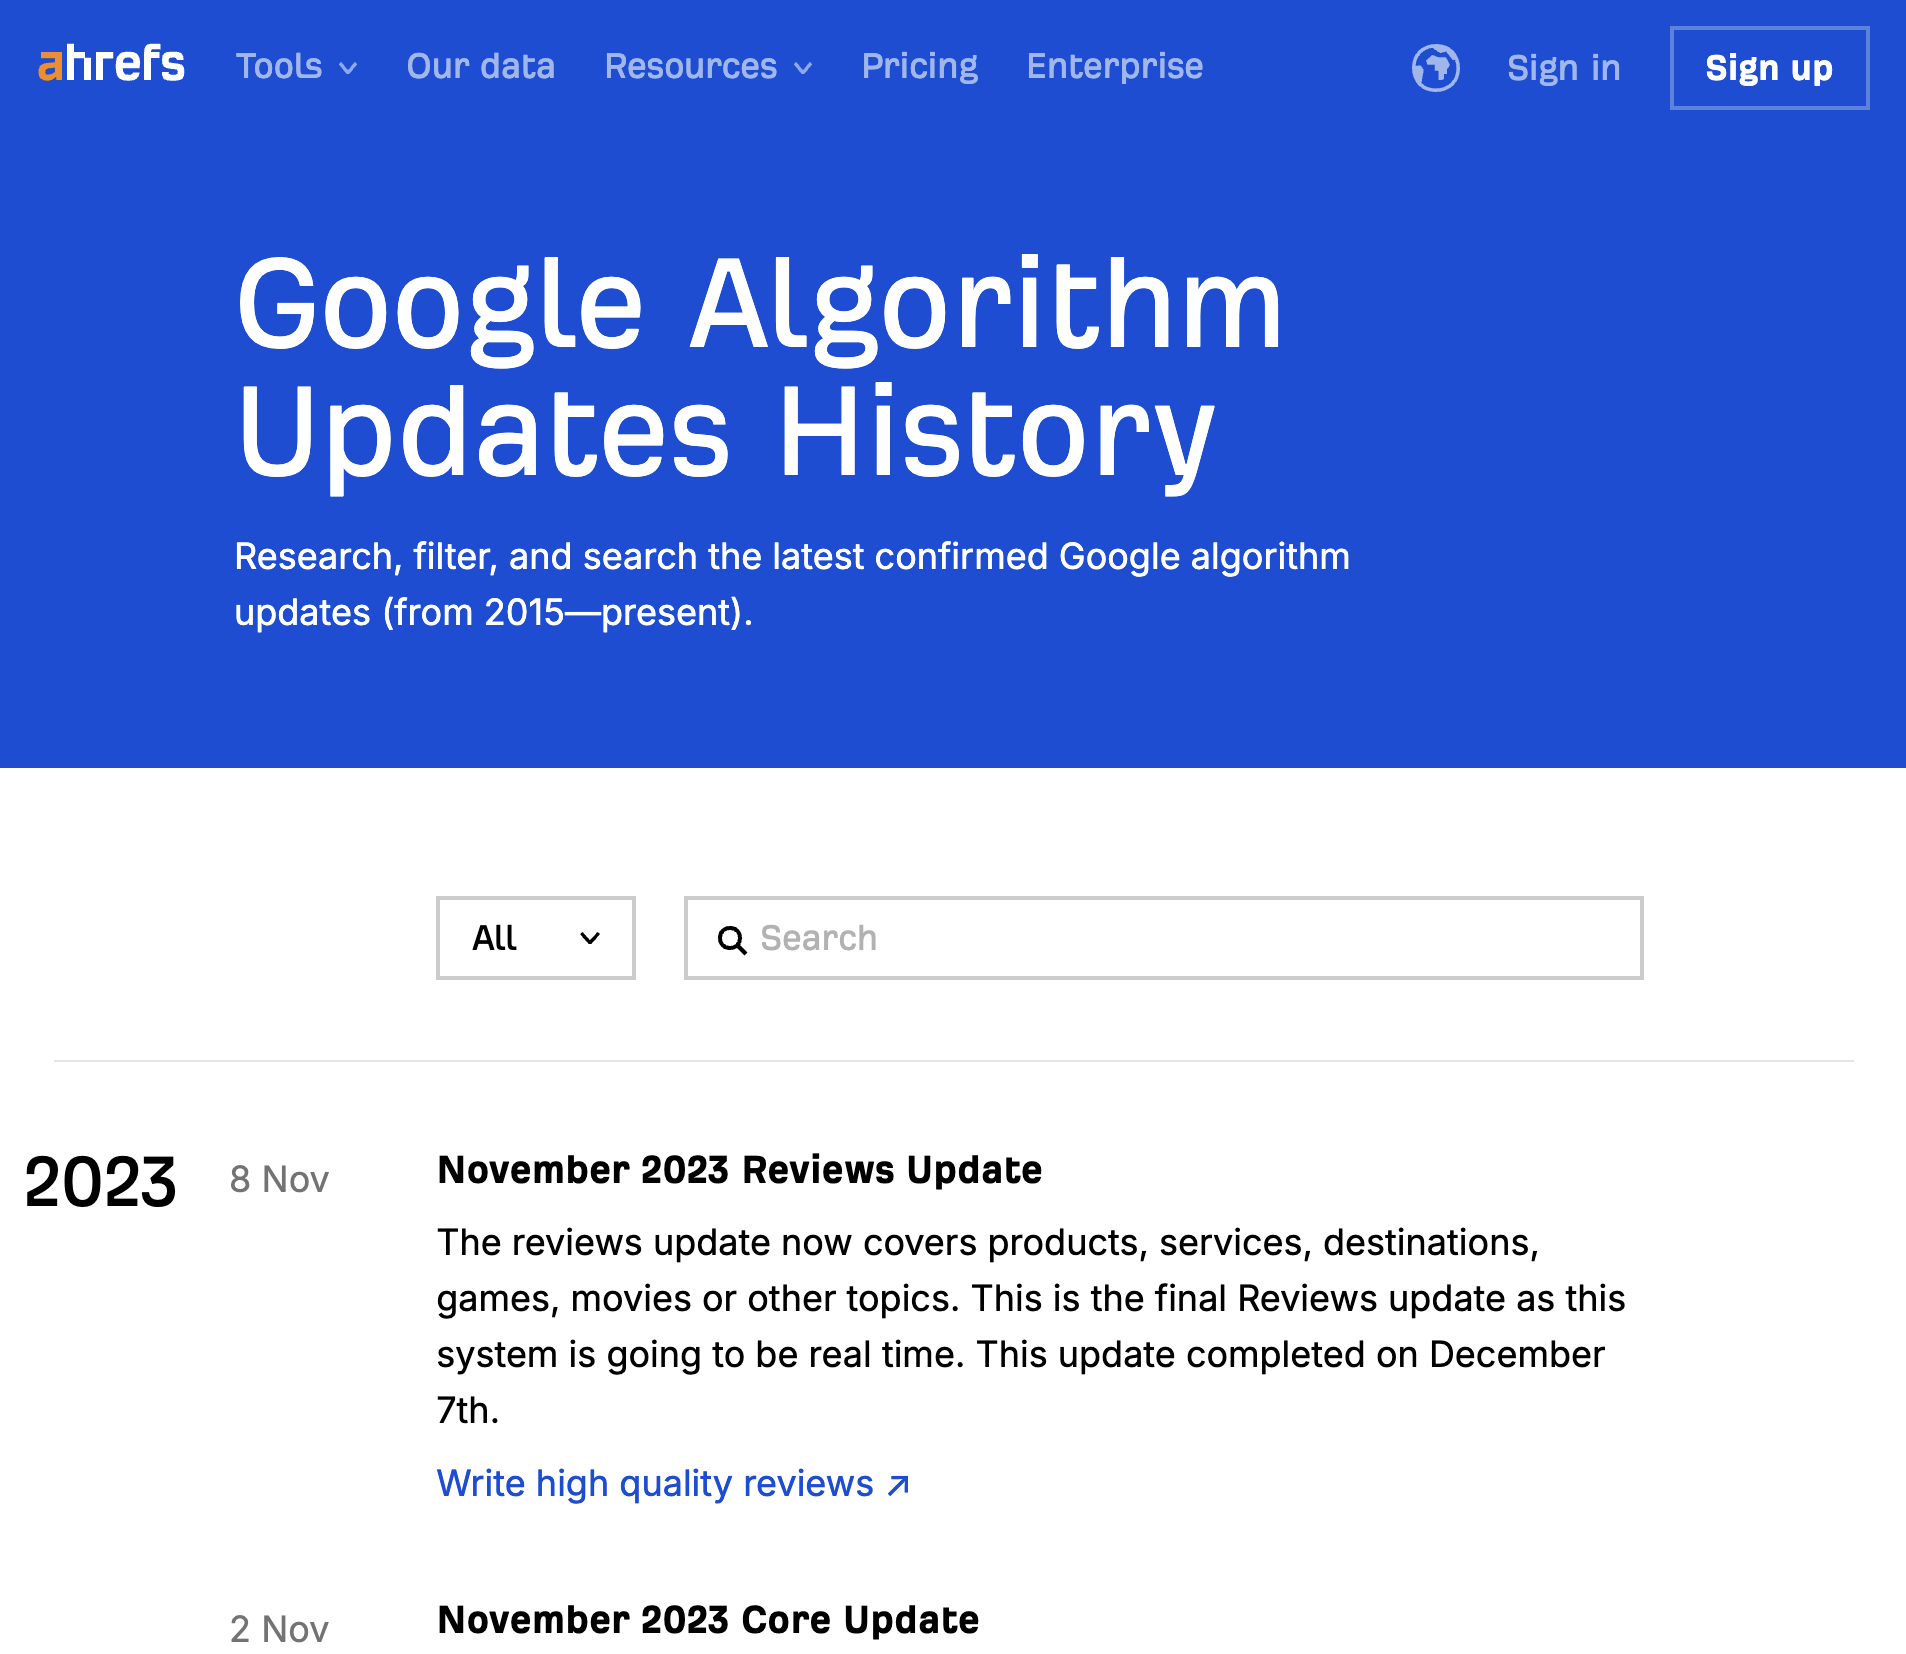 Example of Ahrefs' headless CMS displaying Google's algorithm update history on a webpage